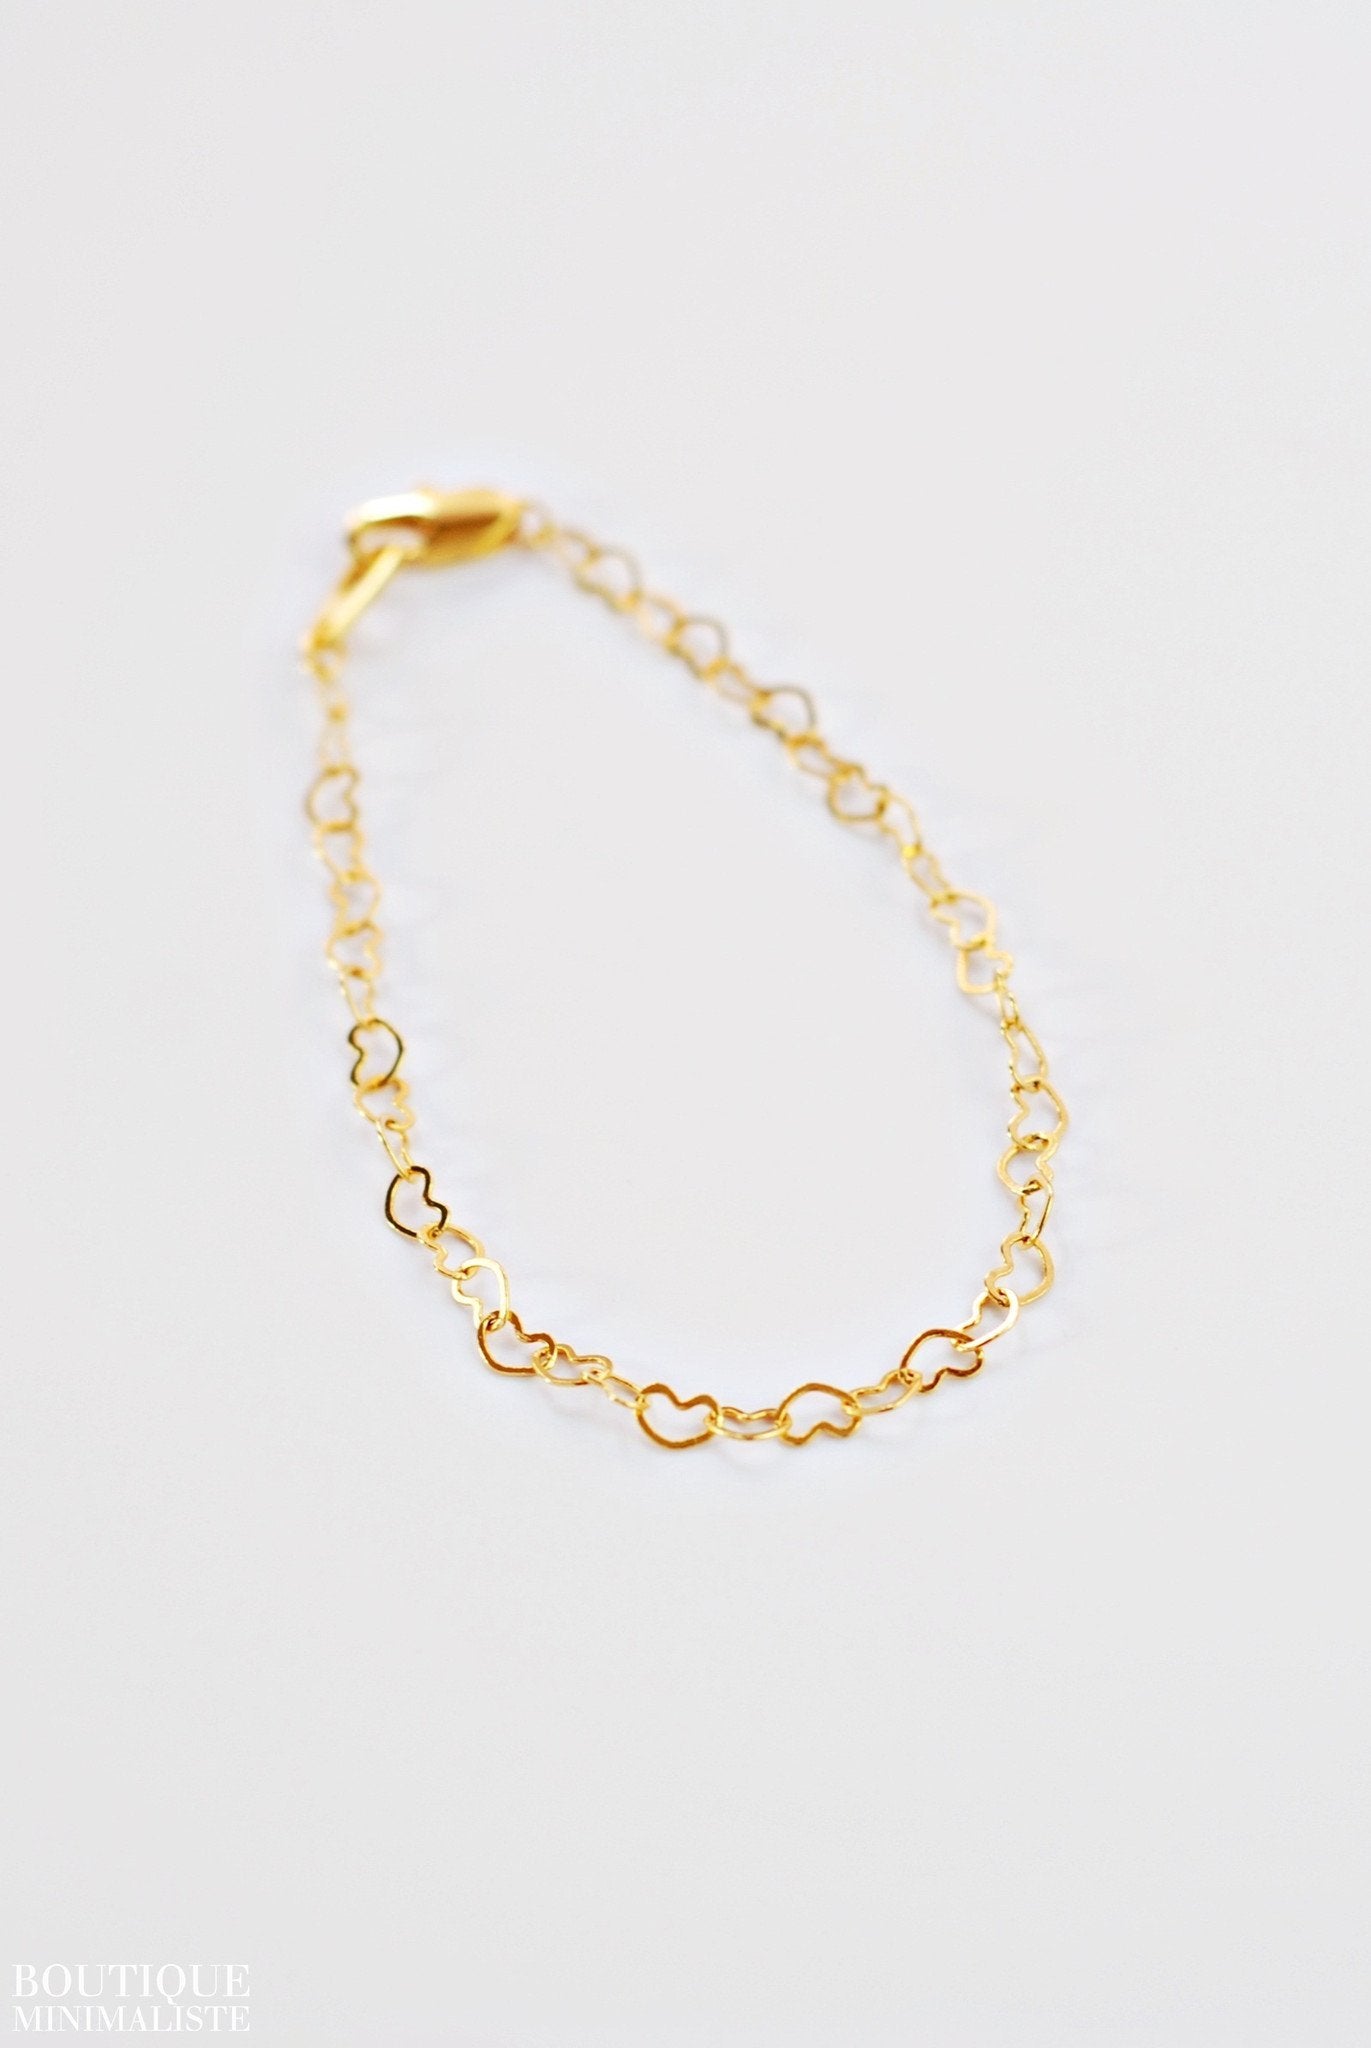 Chain bracelet - Hearts - Boutique Minimaliste has waterproof, durable, elegant and vintage inspired jewelry